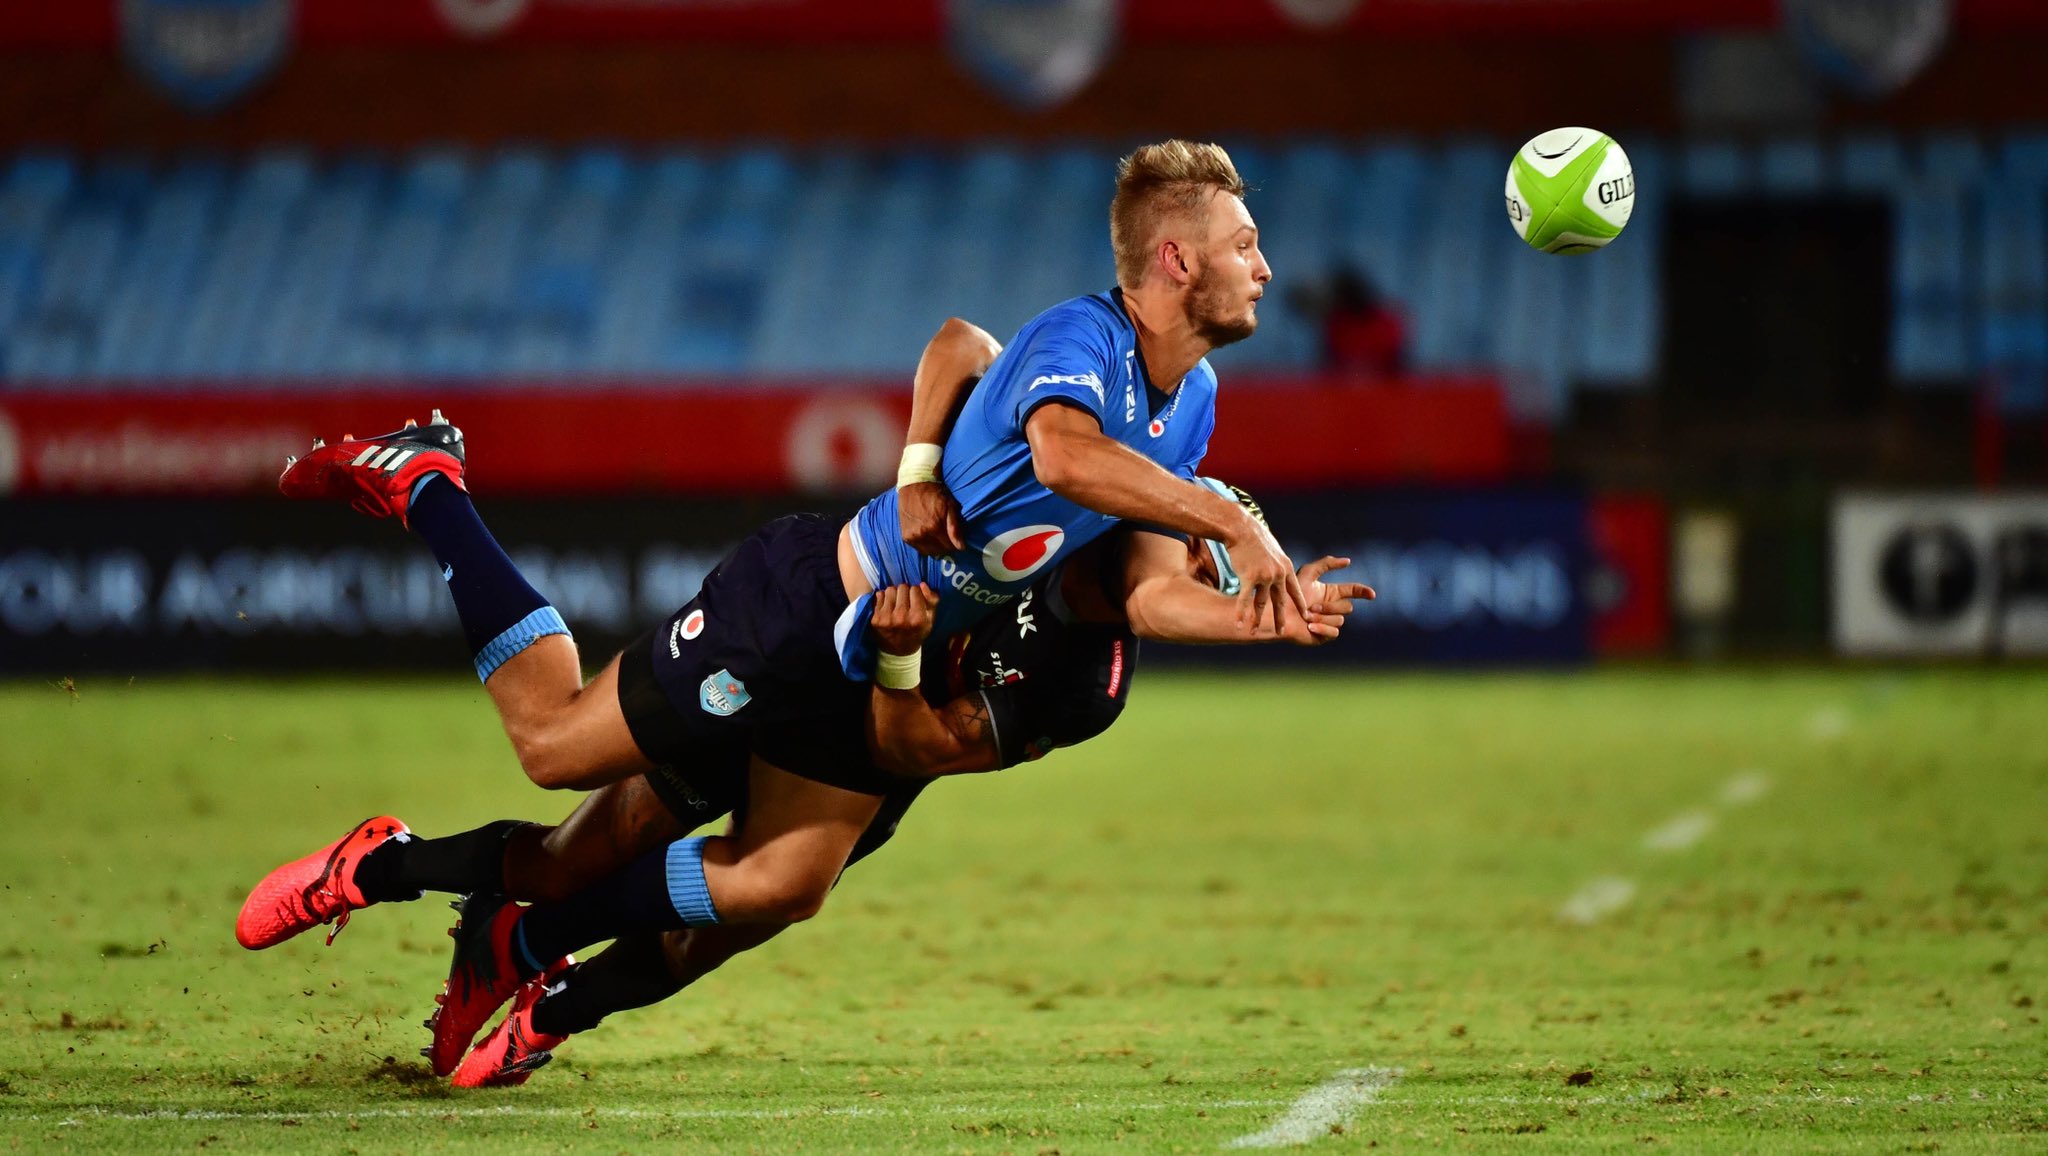 Vodacom Bulls come back to clinch victory overthe DHL Stormers at Loftus Versfeld